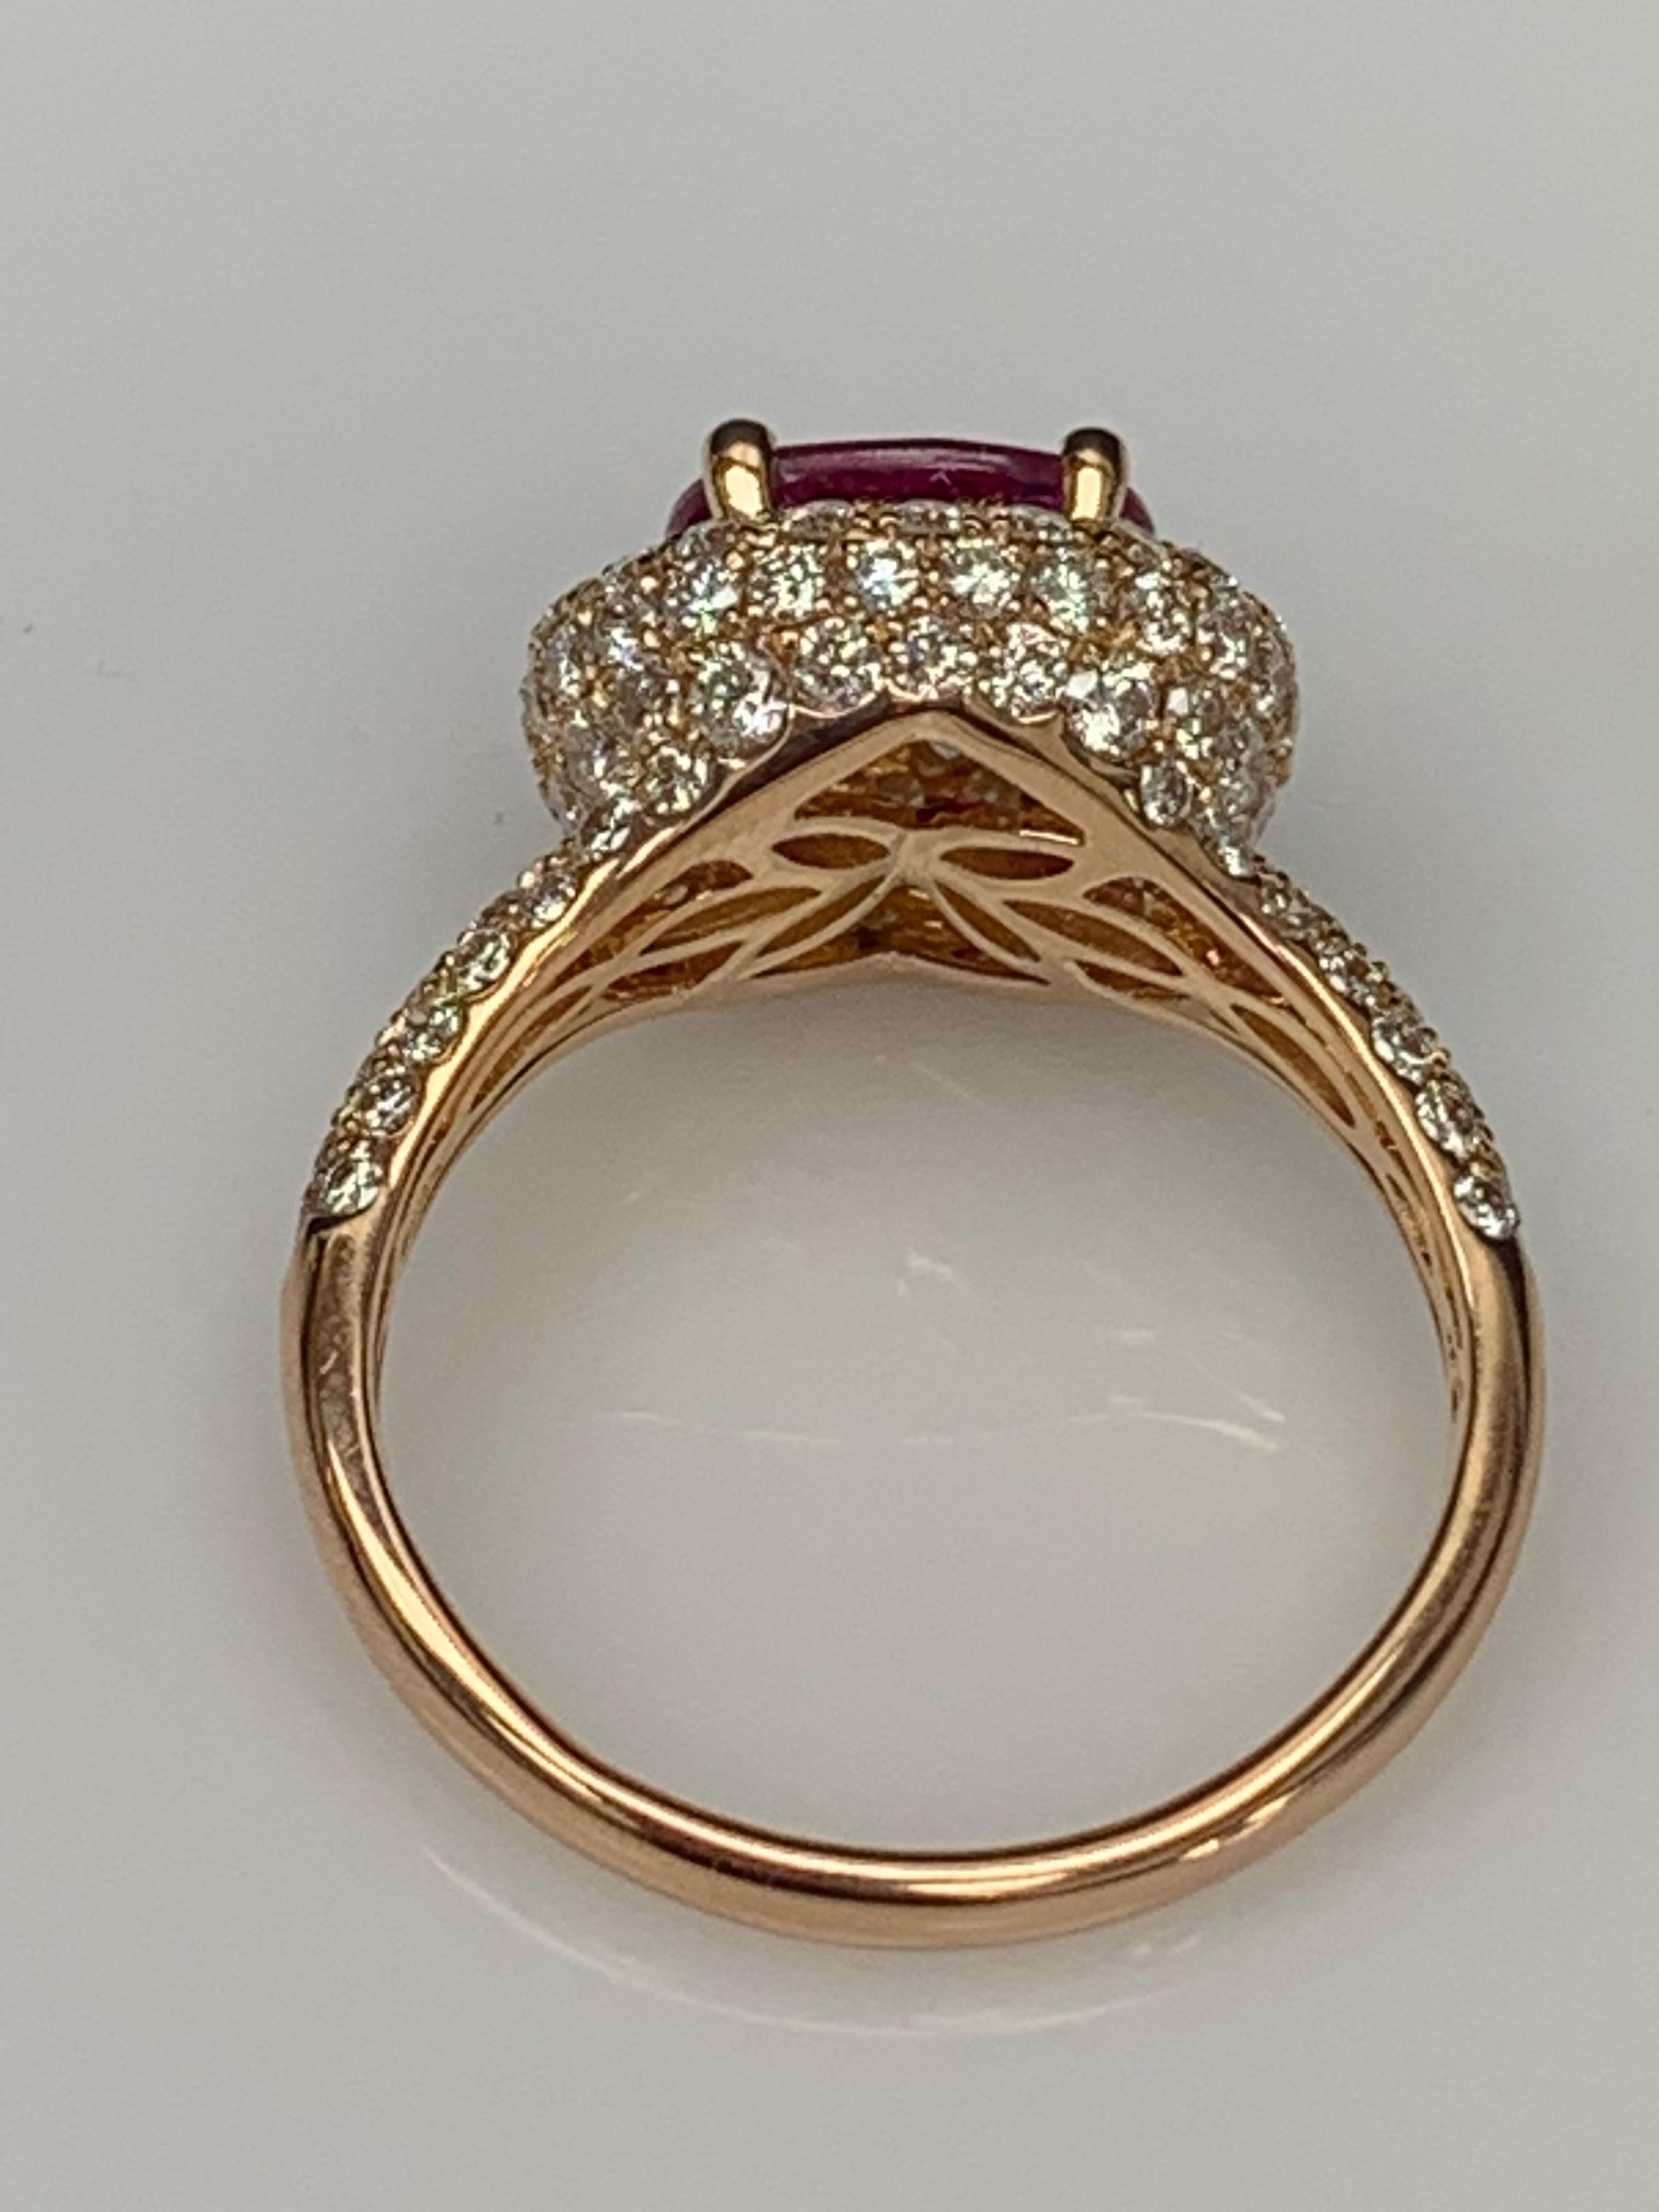 1.26 Carat Oval Cut Ruby and Diamond Fashion Ring in 18K Rose Gold For Sale 4